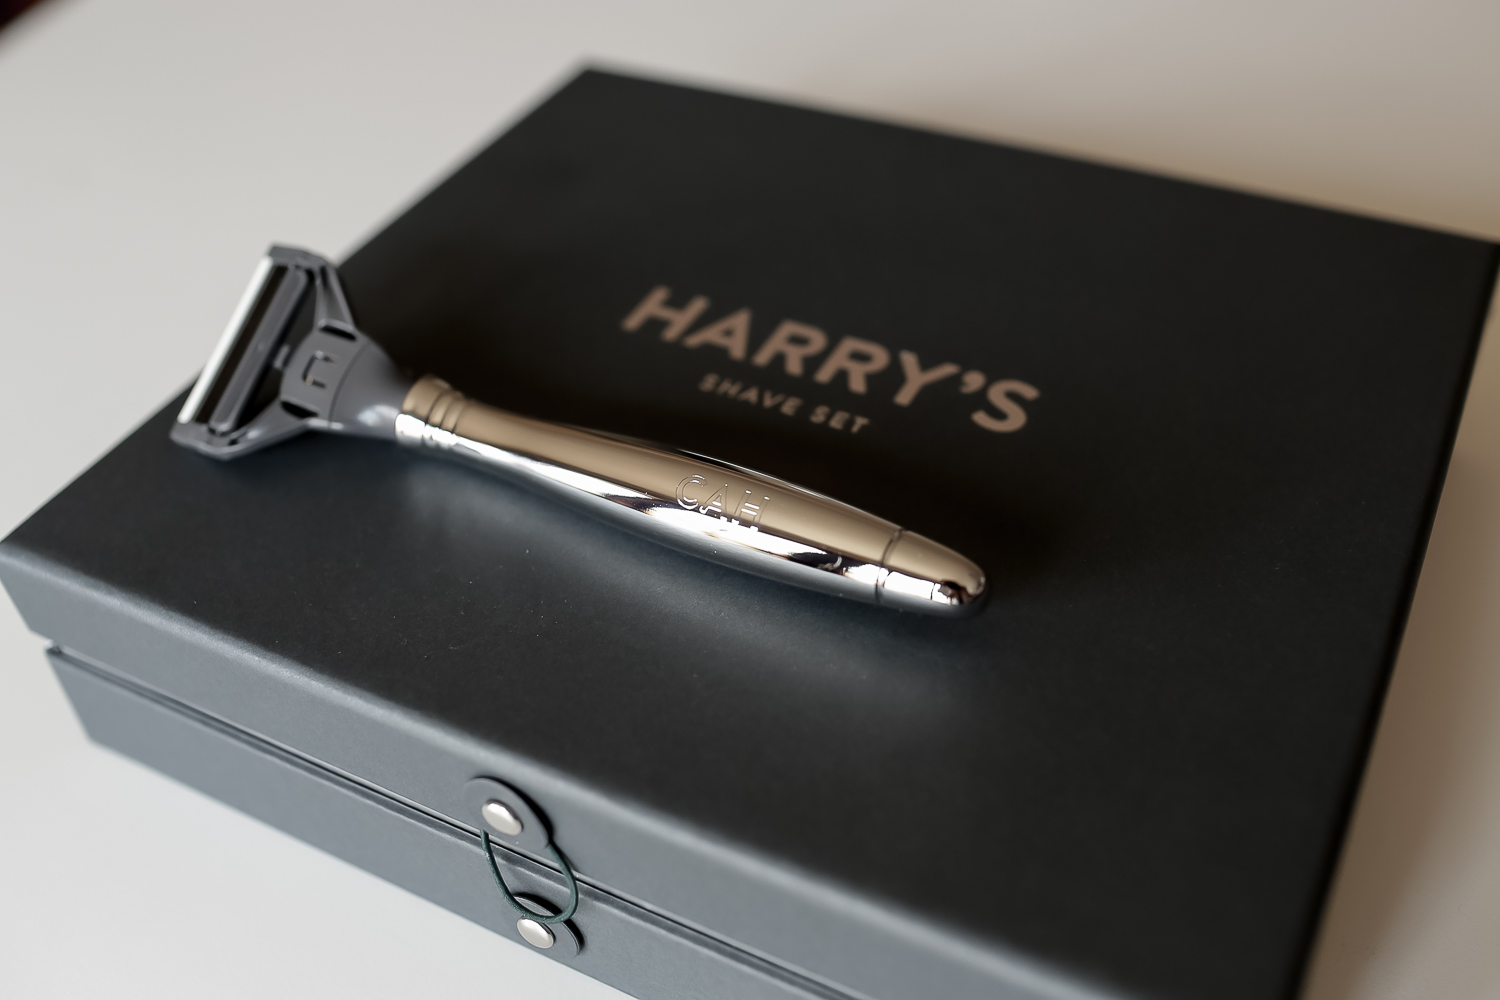 harry's shave set, groomsmen essential, mens fashion, grooming, chris holt photography, los angeles wedding photography